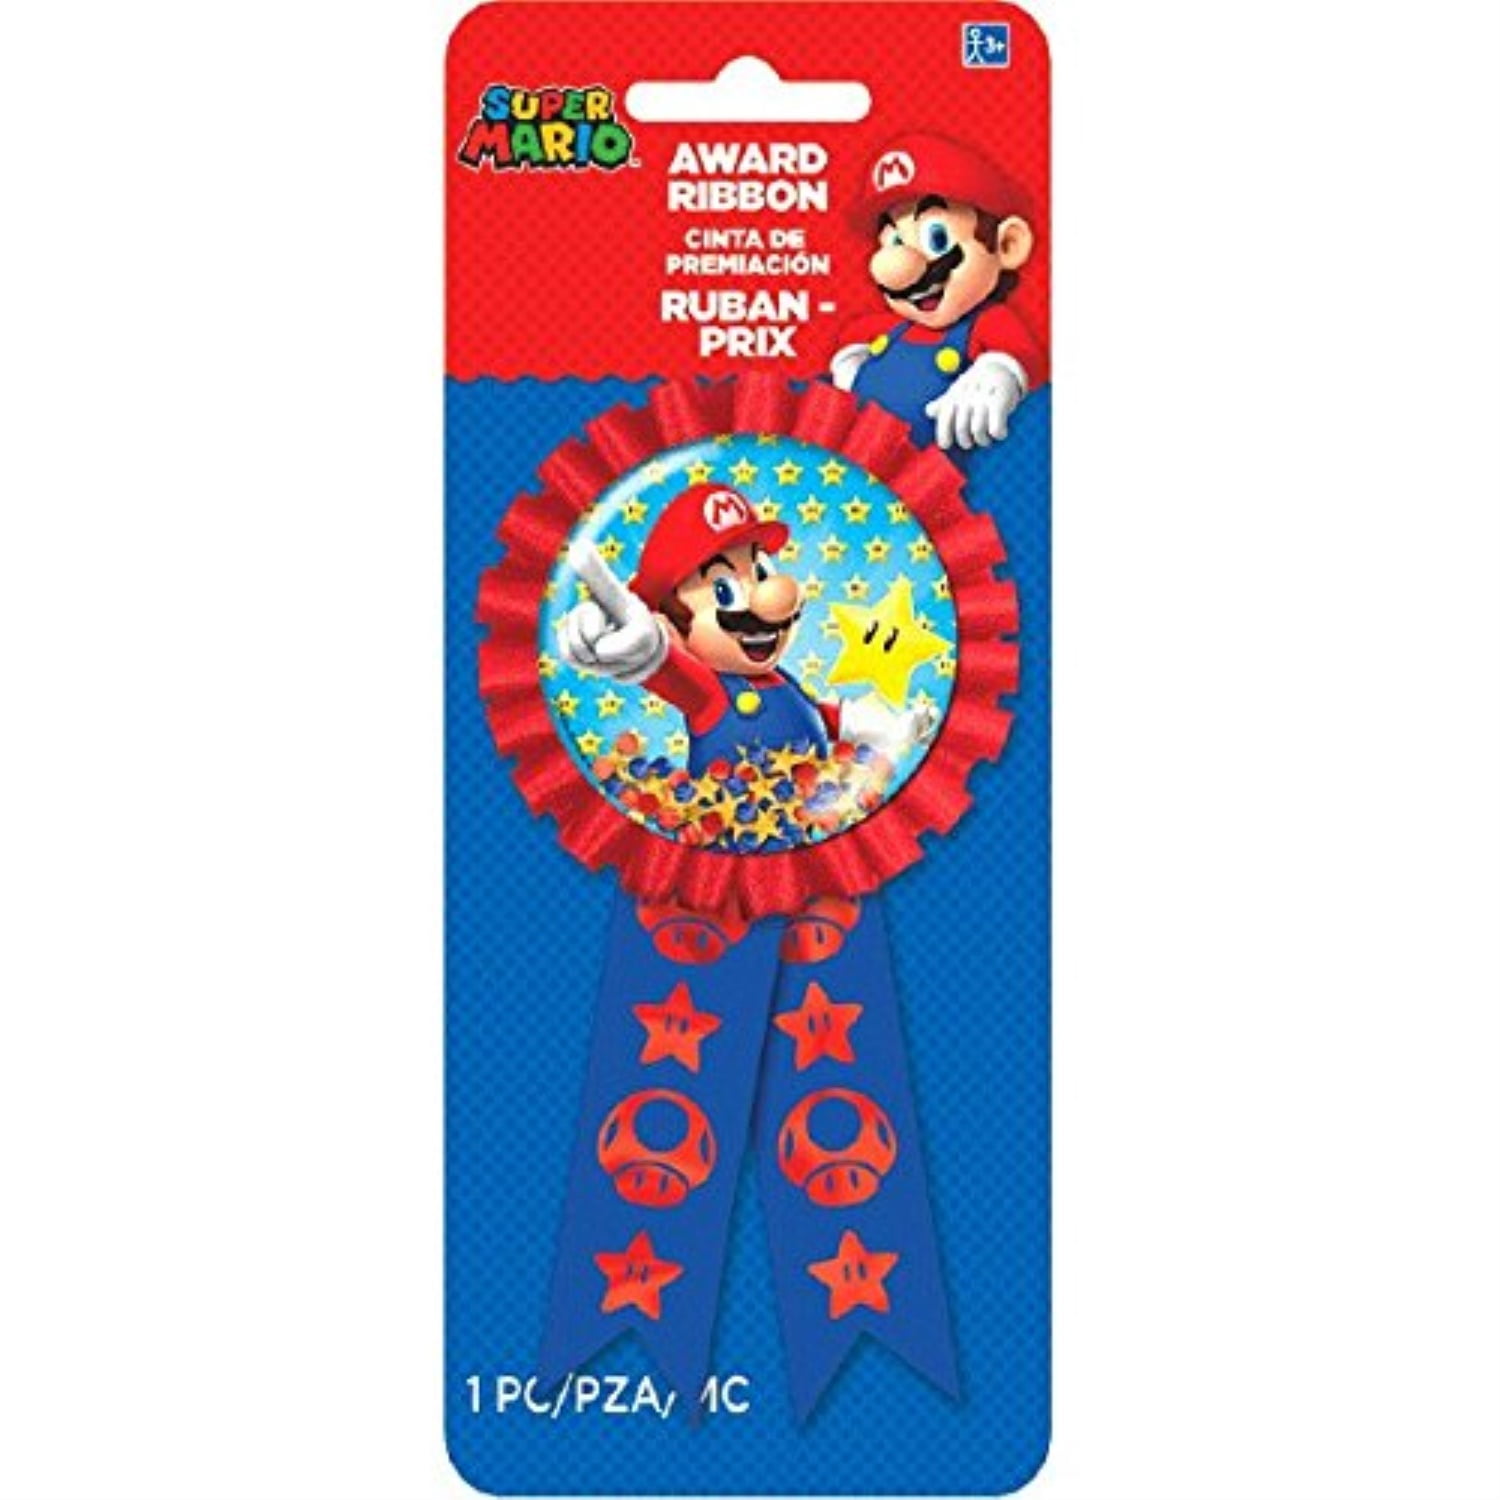 SUPER MARIO GUEST OF HONOR RIBBON ~ Birthday Party Supplies Favors Video Game 